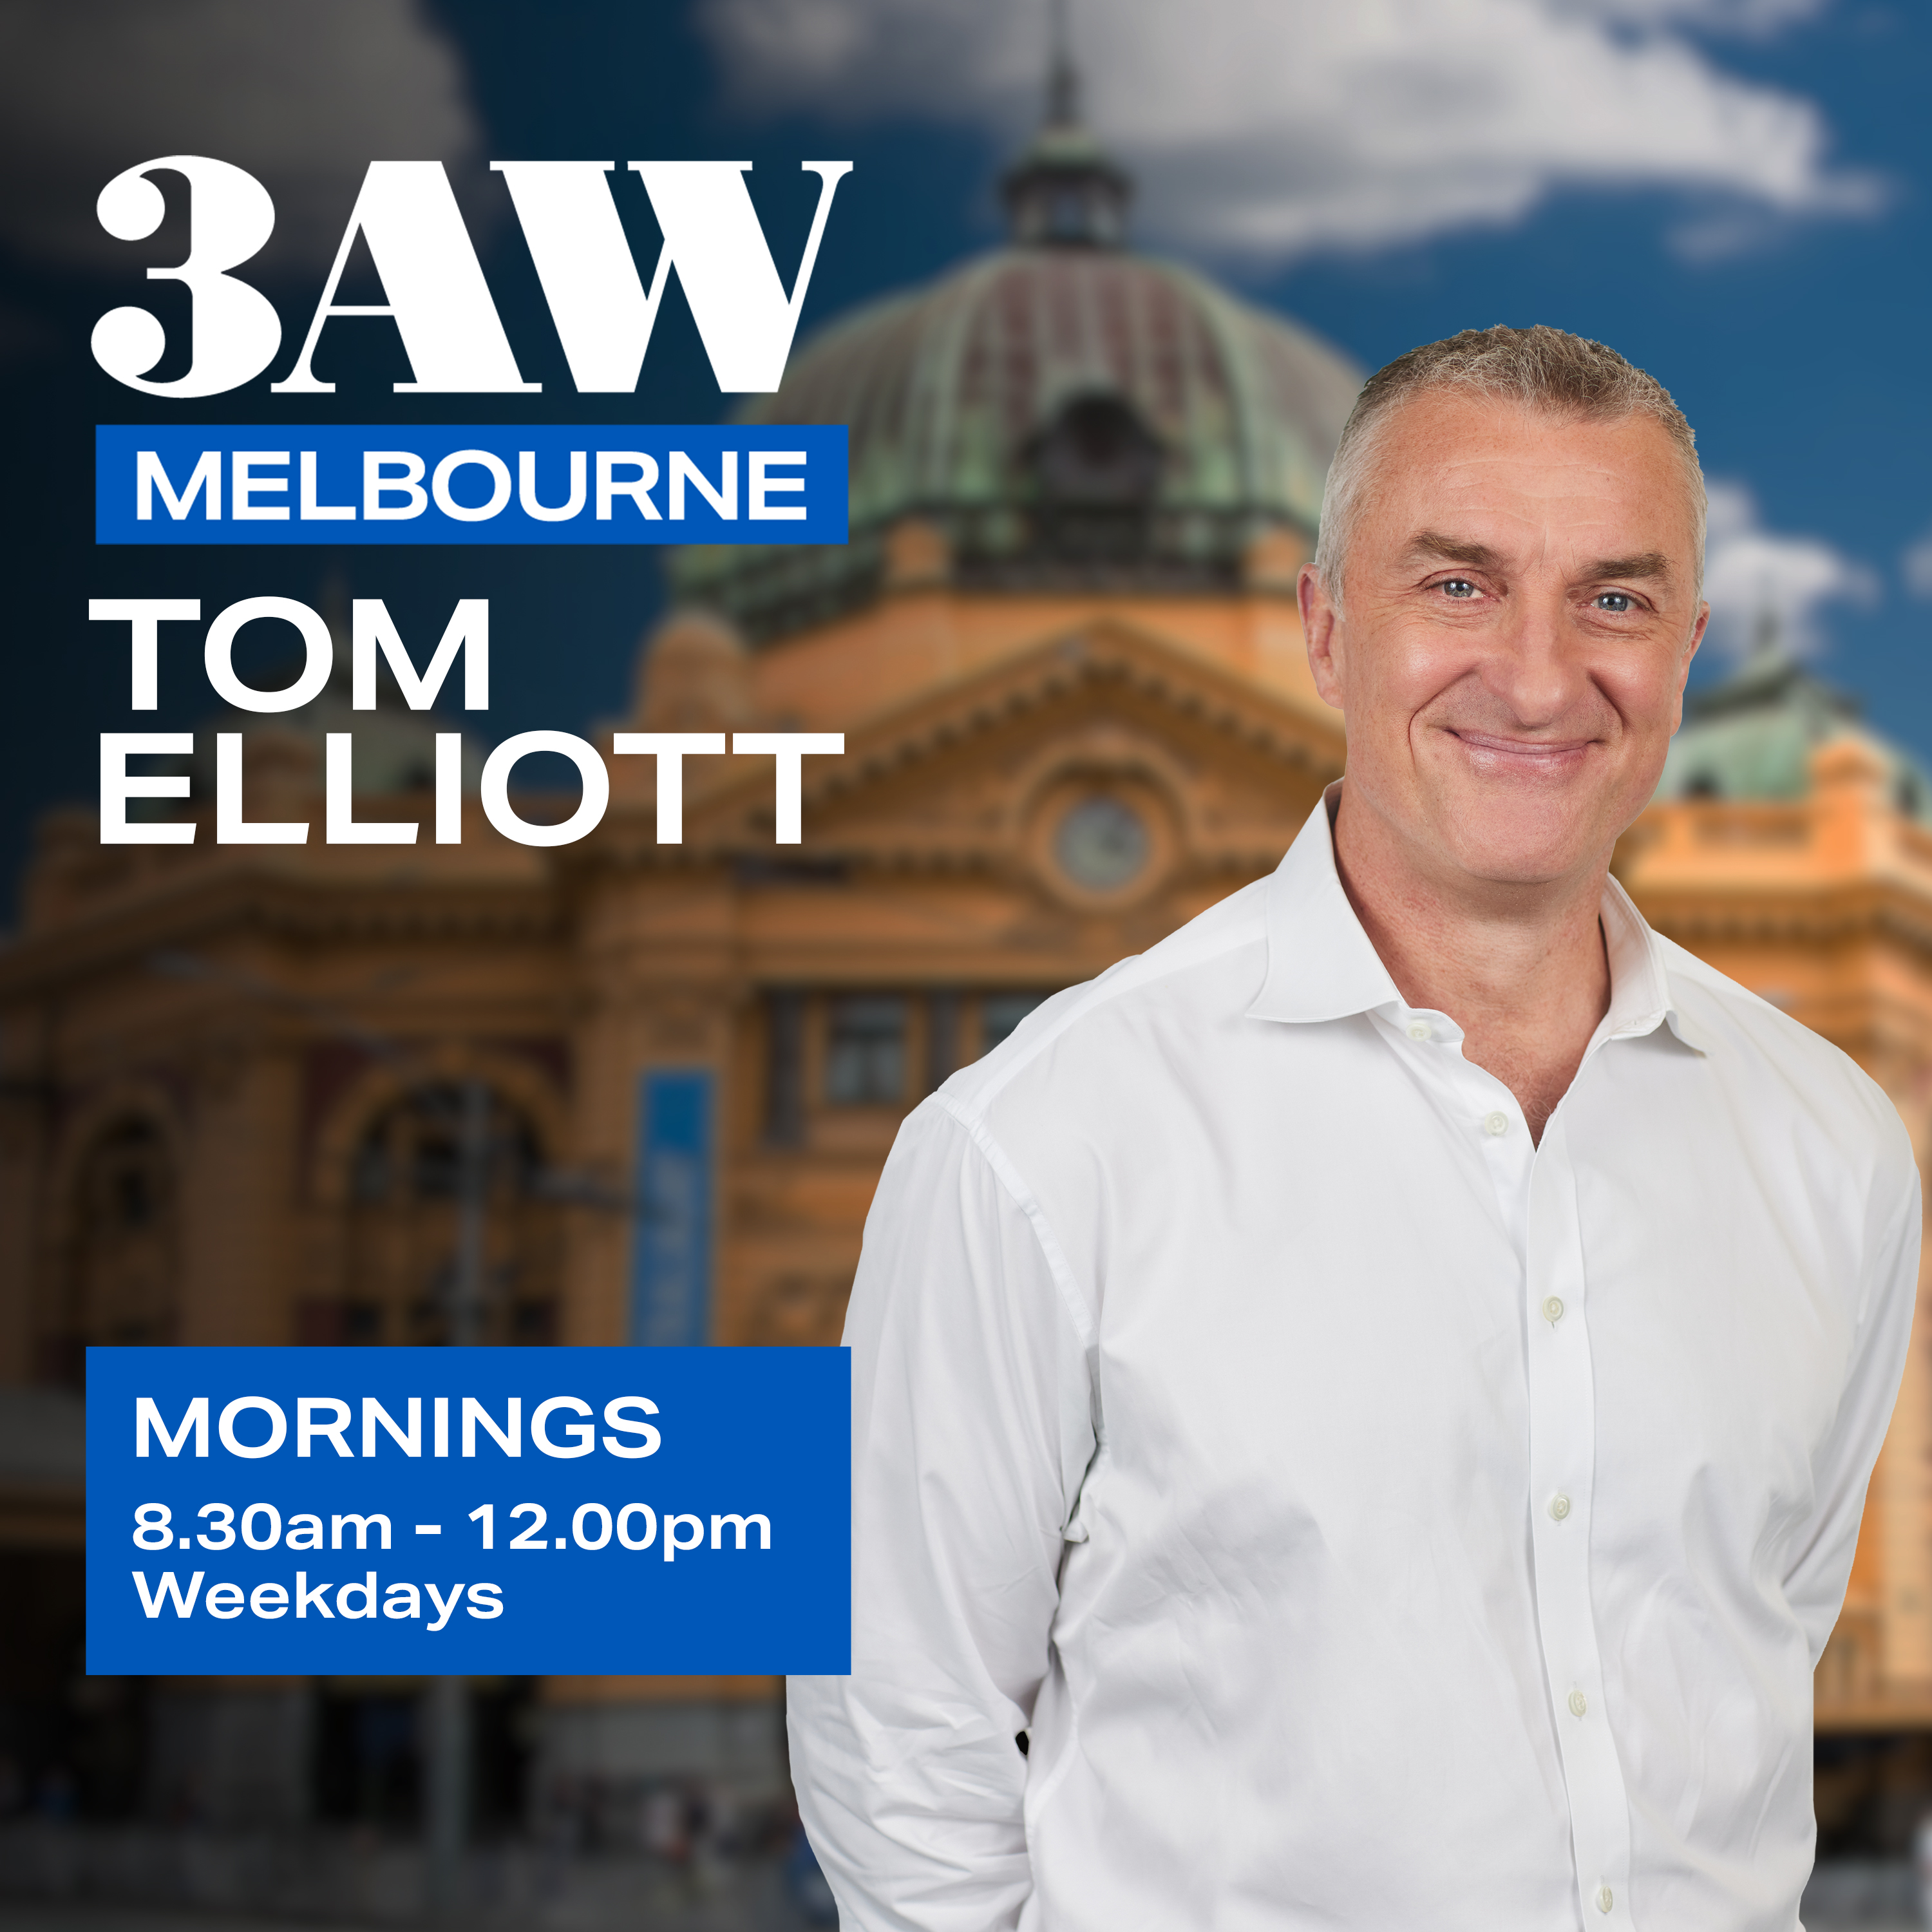 What 'worries' Tom Elliott about the AFL's reported grand final entertainment this year